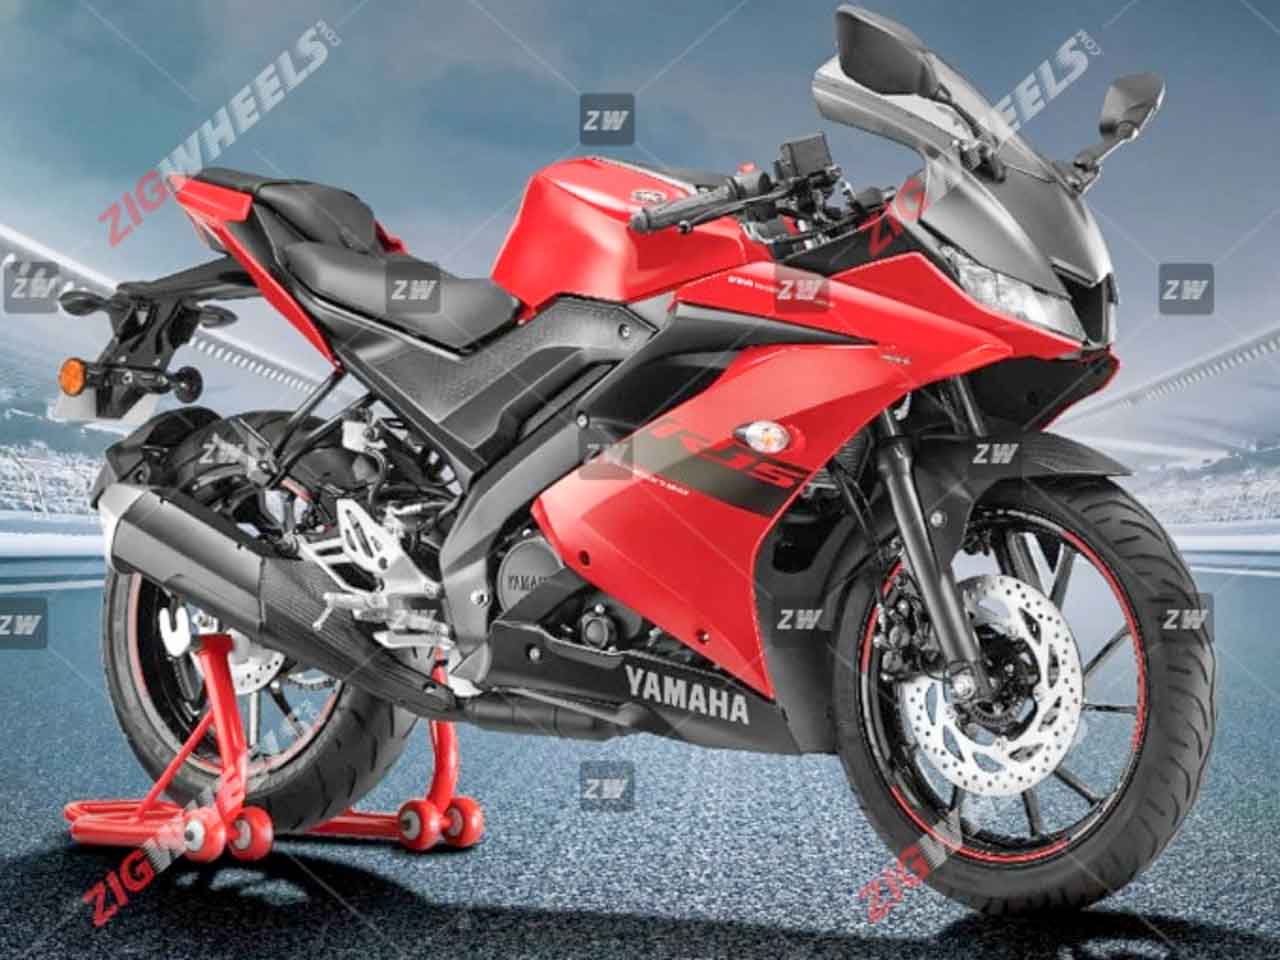 2021 Yamaha R15 New Red Colour Option Leaks Ahead Of Launch